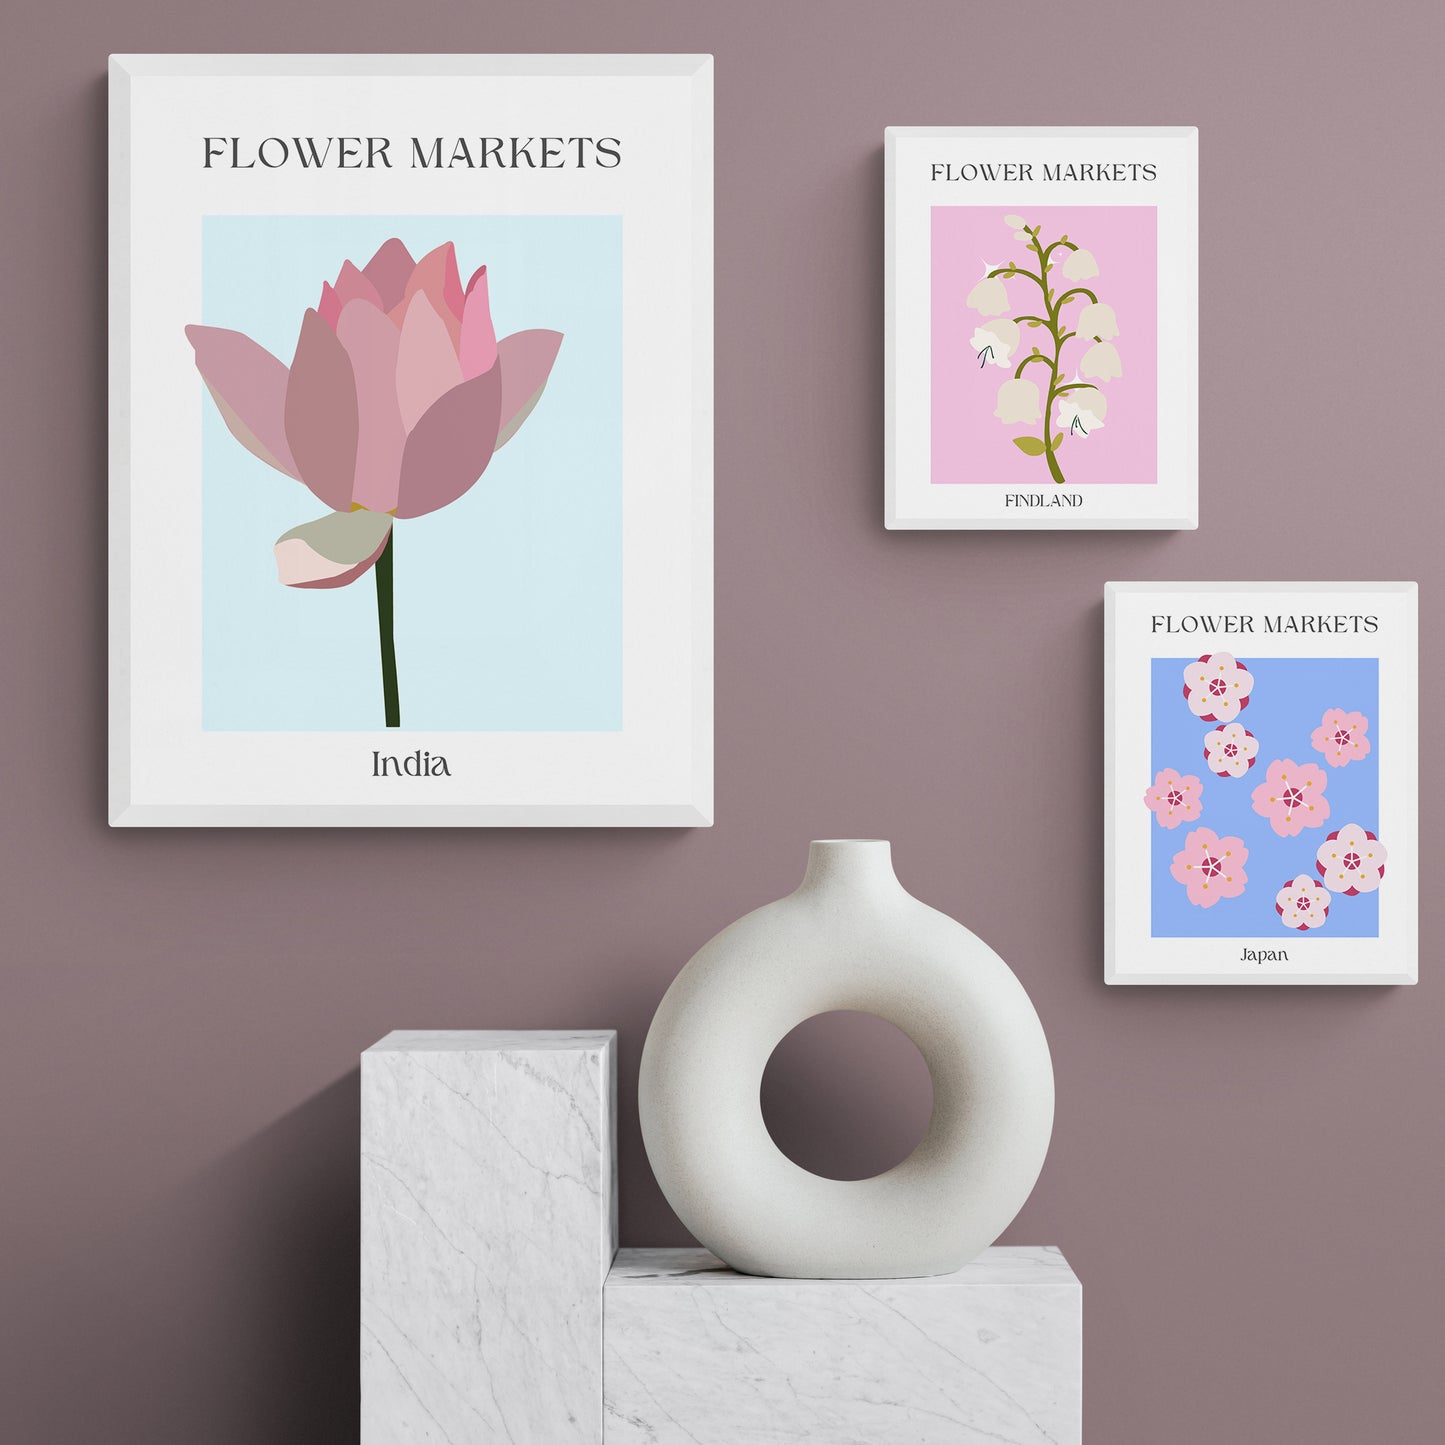 Make a statement in your home with this Italy Flowers Market Print. Featuring bright colors and an eye-catching design, this print will add a unique and modern touch to your kitchen, bedroom, or living room wall. Created from designer prints, this stylish poster adds a Scandinavian vibe to your home décor. Enhance your home with this stylish and contemporary art print!